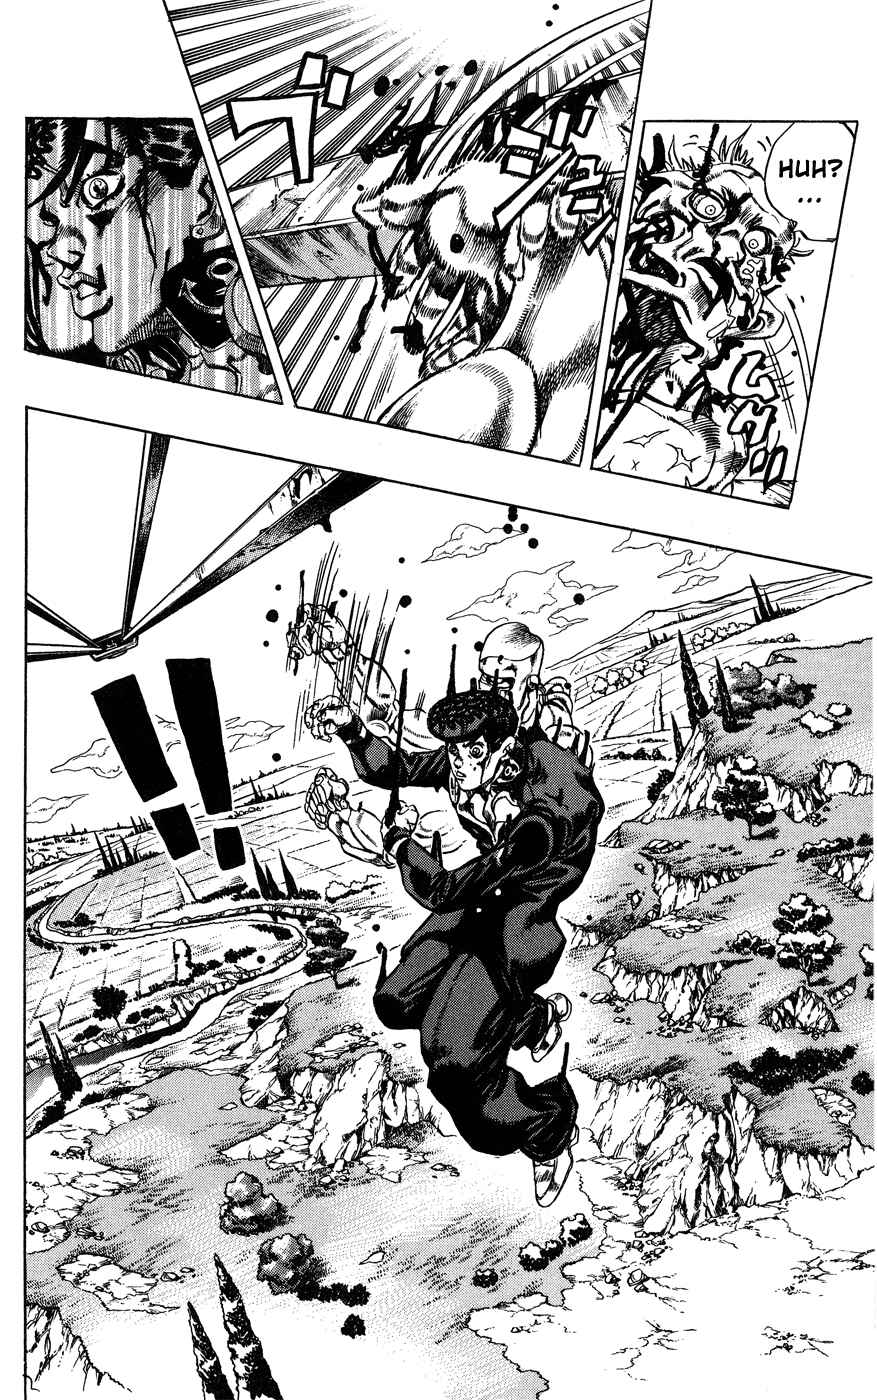 JoJo's Bizarre Adventure Part 4 Diamond is Unbreakable Vol. 15 Ch. 138 Who Wants to Live on a Transmission Tower? Part 6